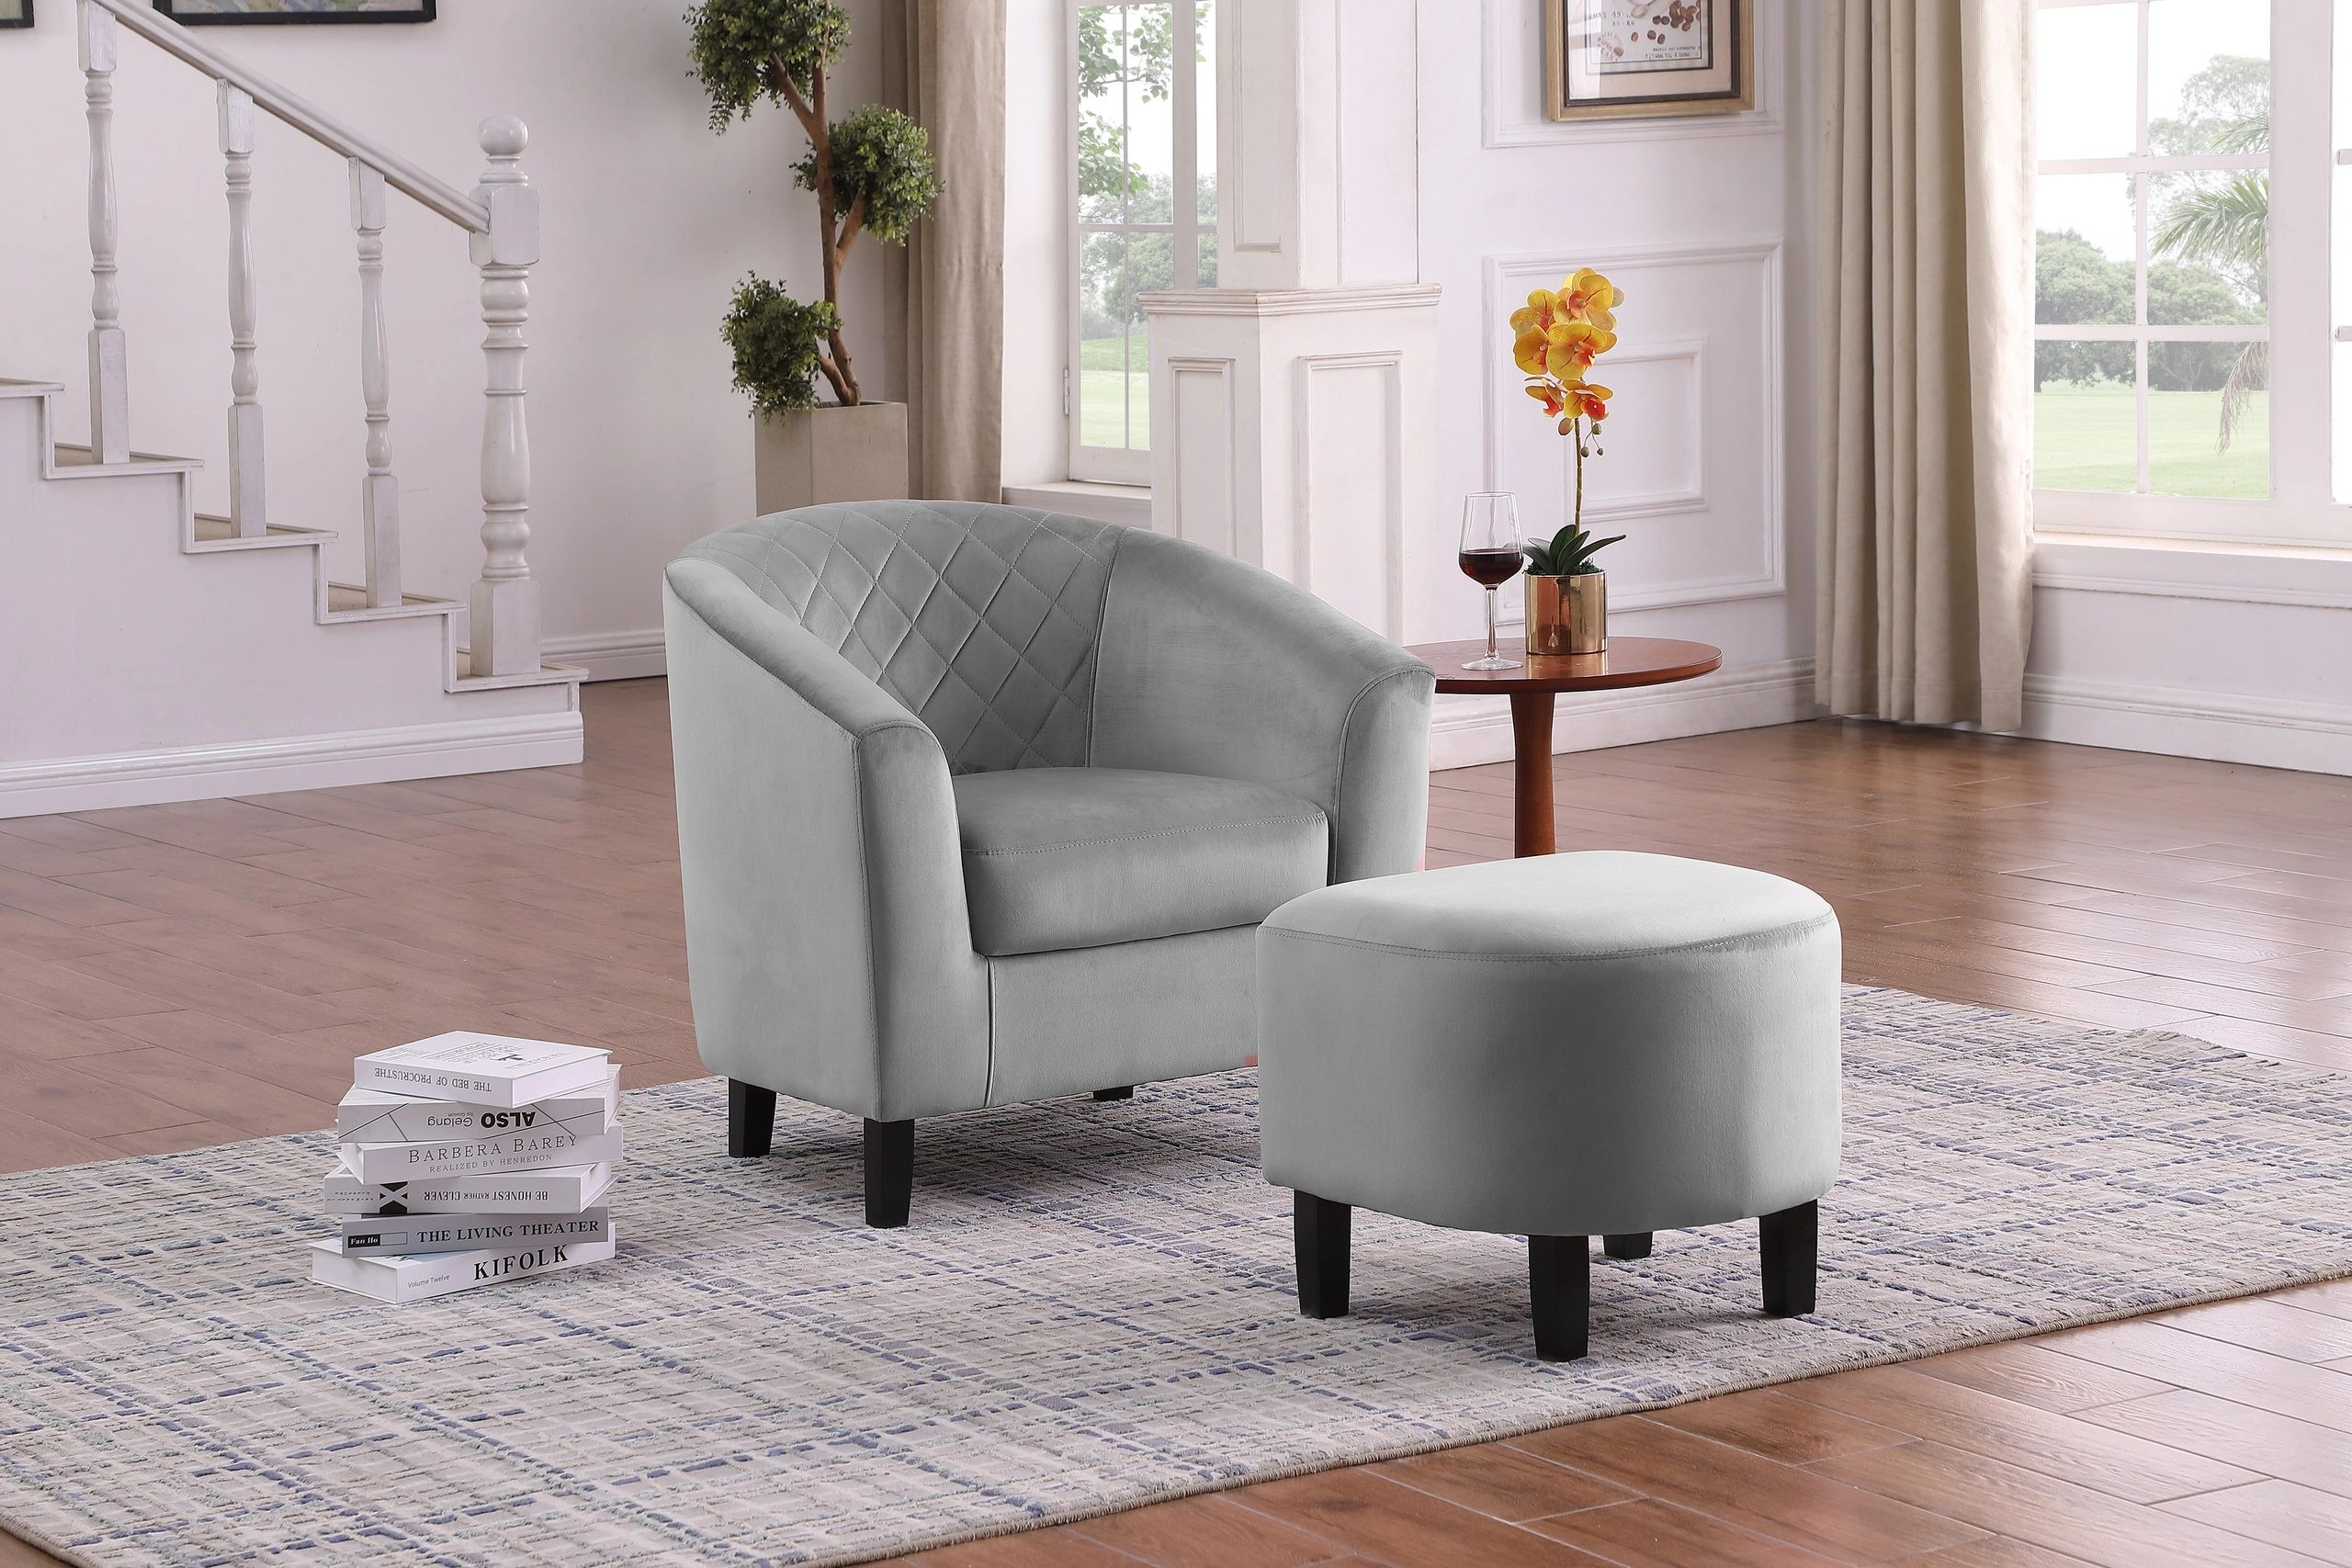 Eliza Tub Chair with Ottoman in Velvet

